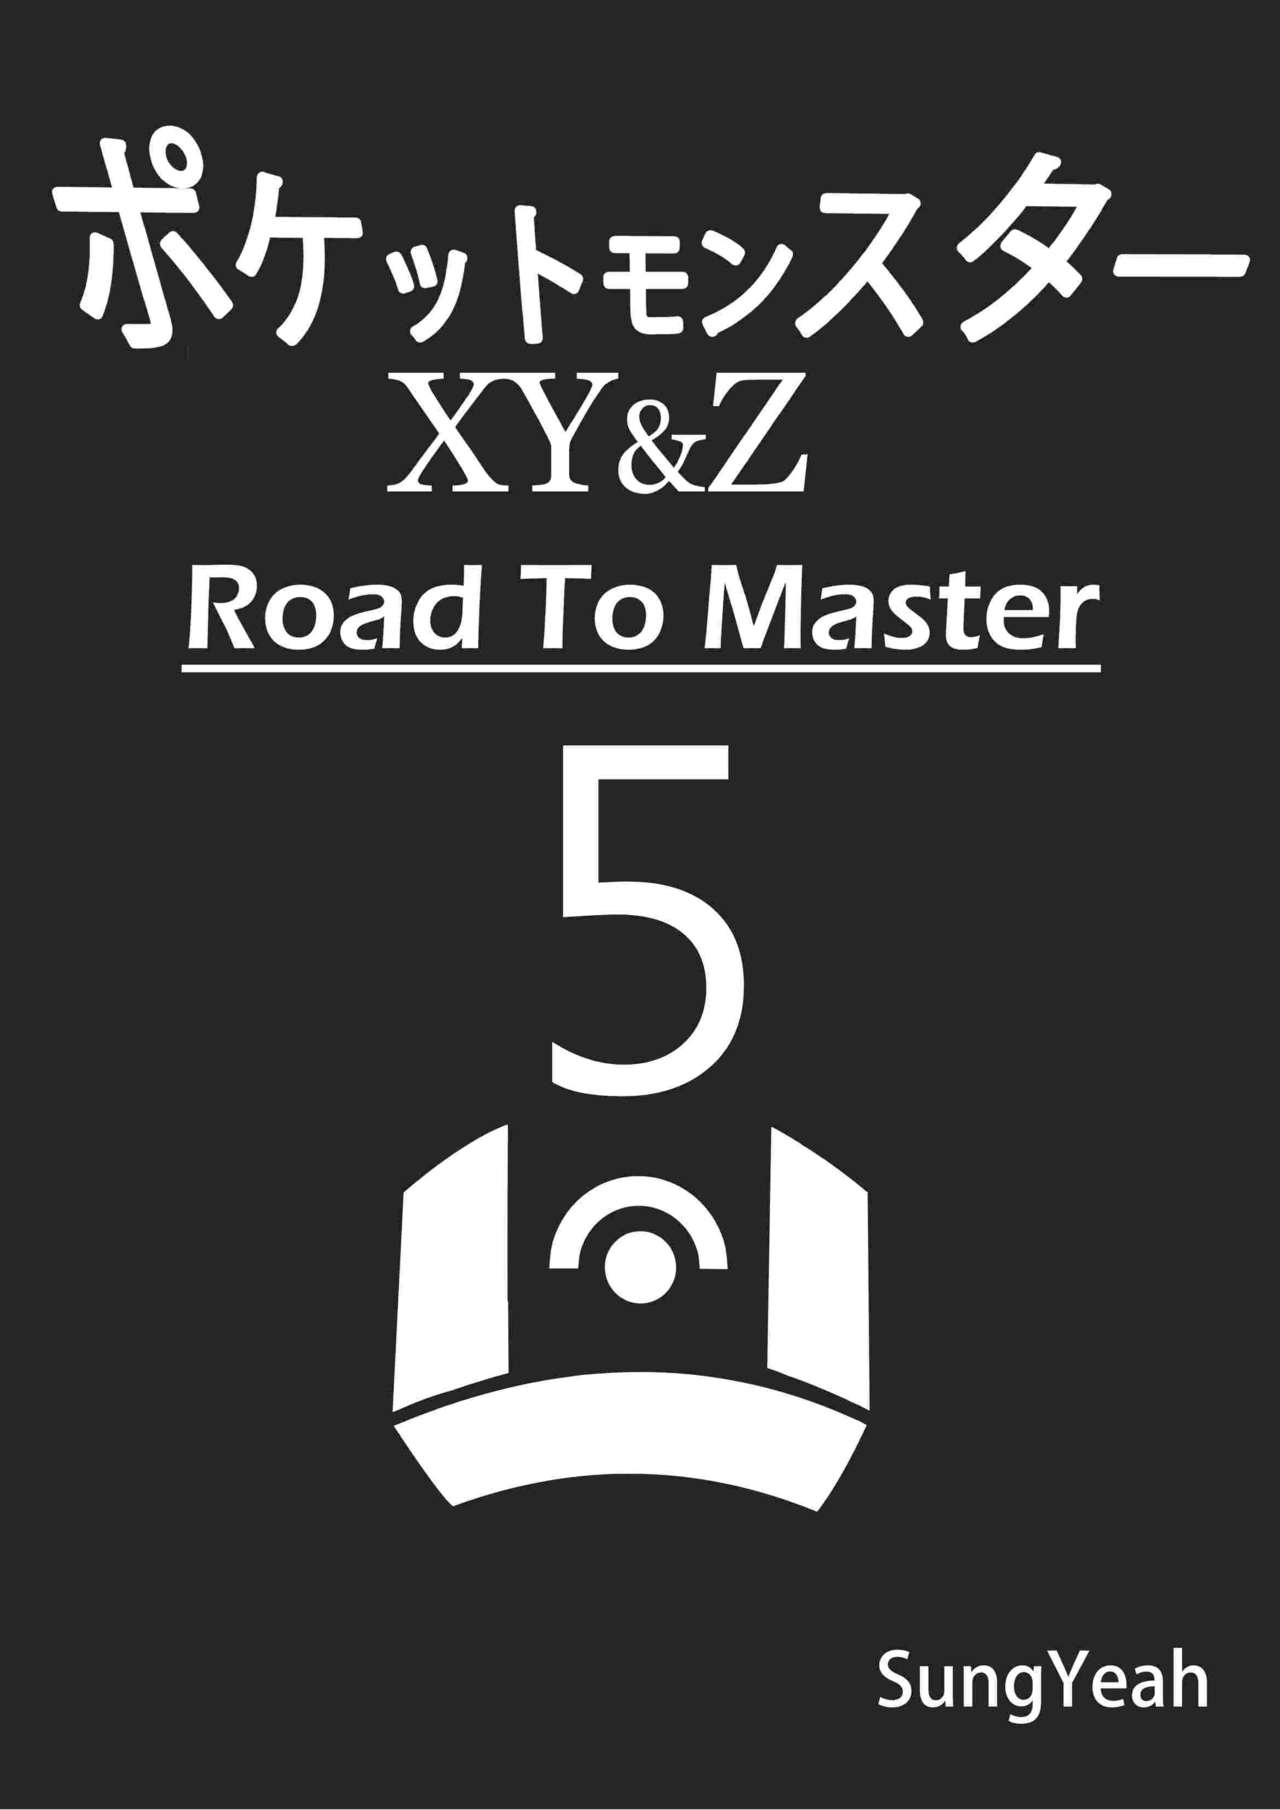 [Sungyeah] Pokemon - Road to Master - Complete 92